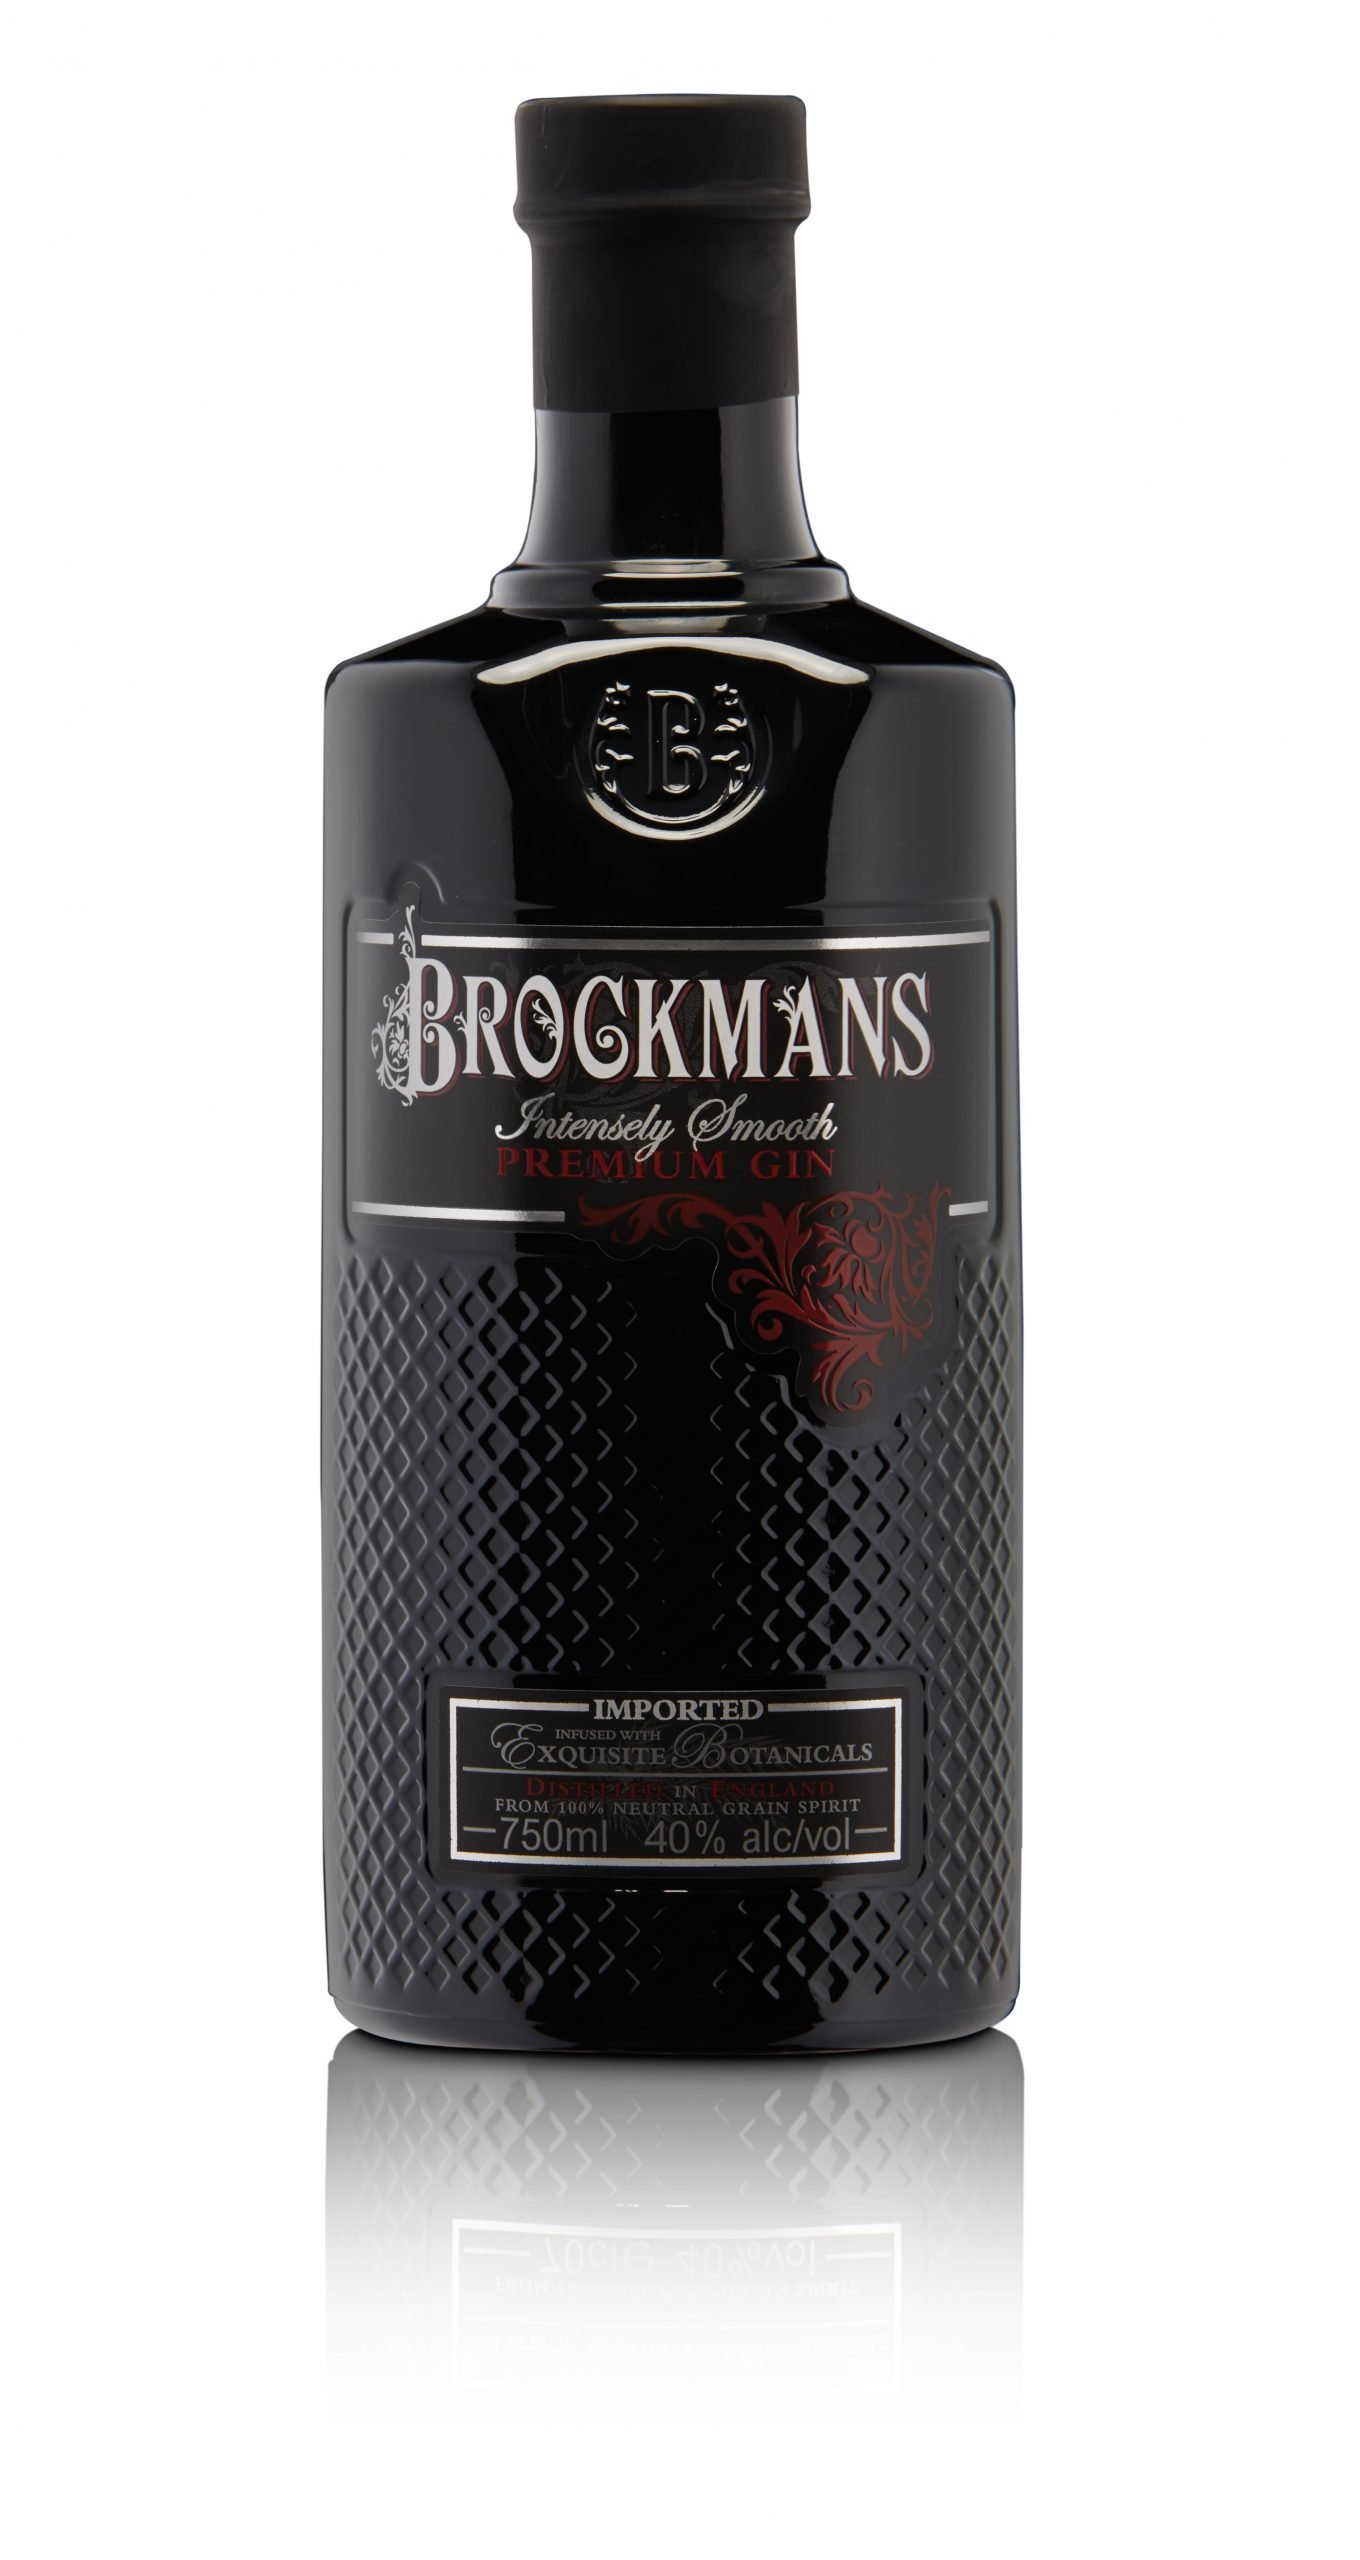 Review: Brockmans Intensely Smooth Premium Gin